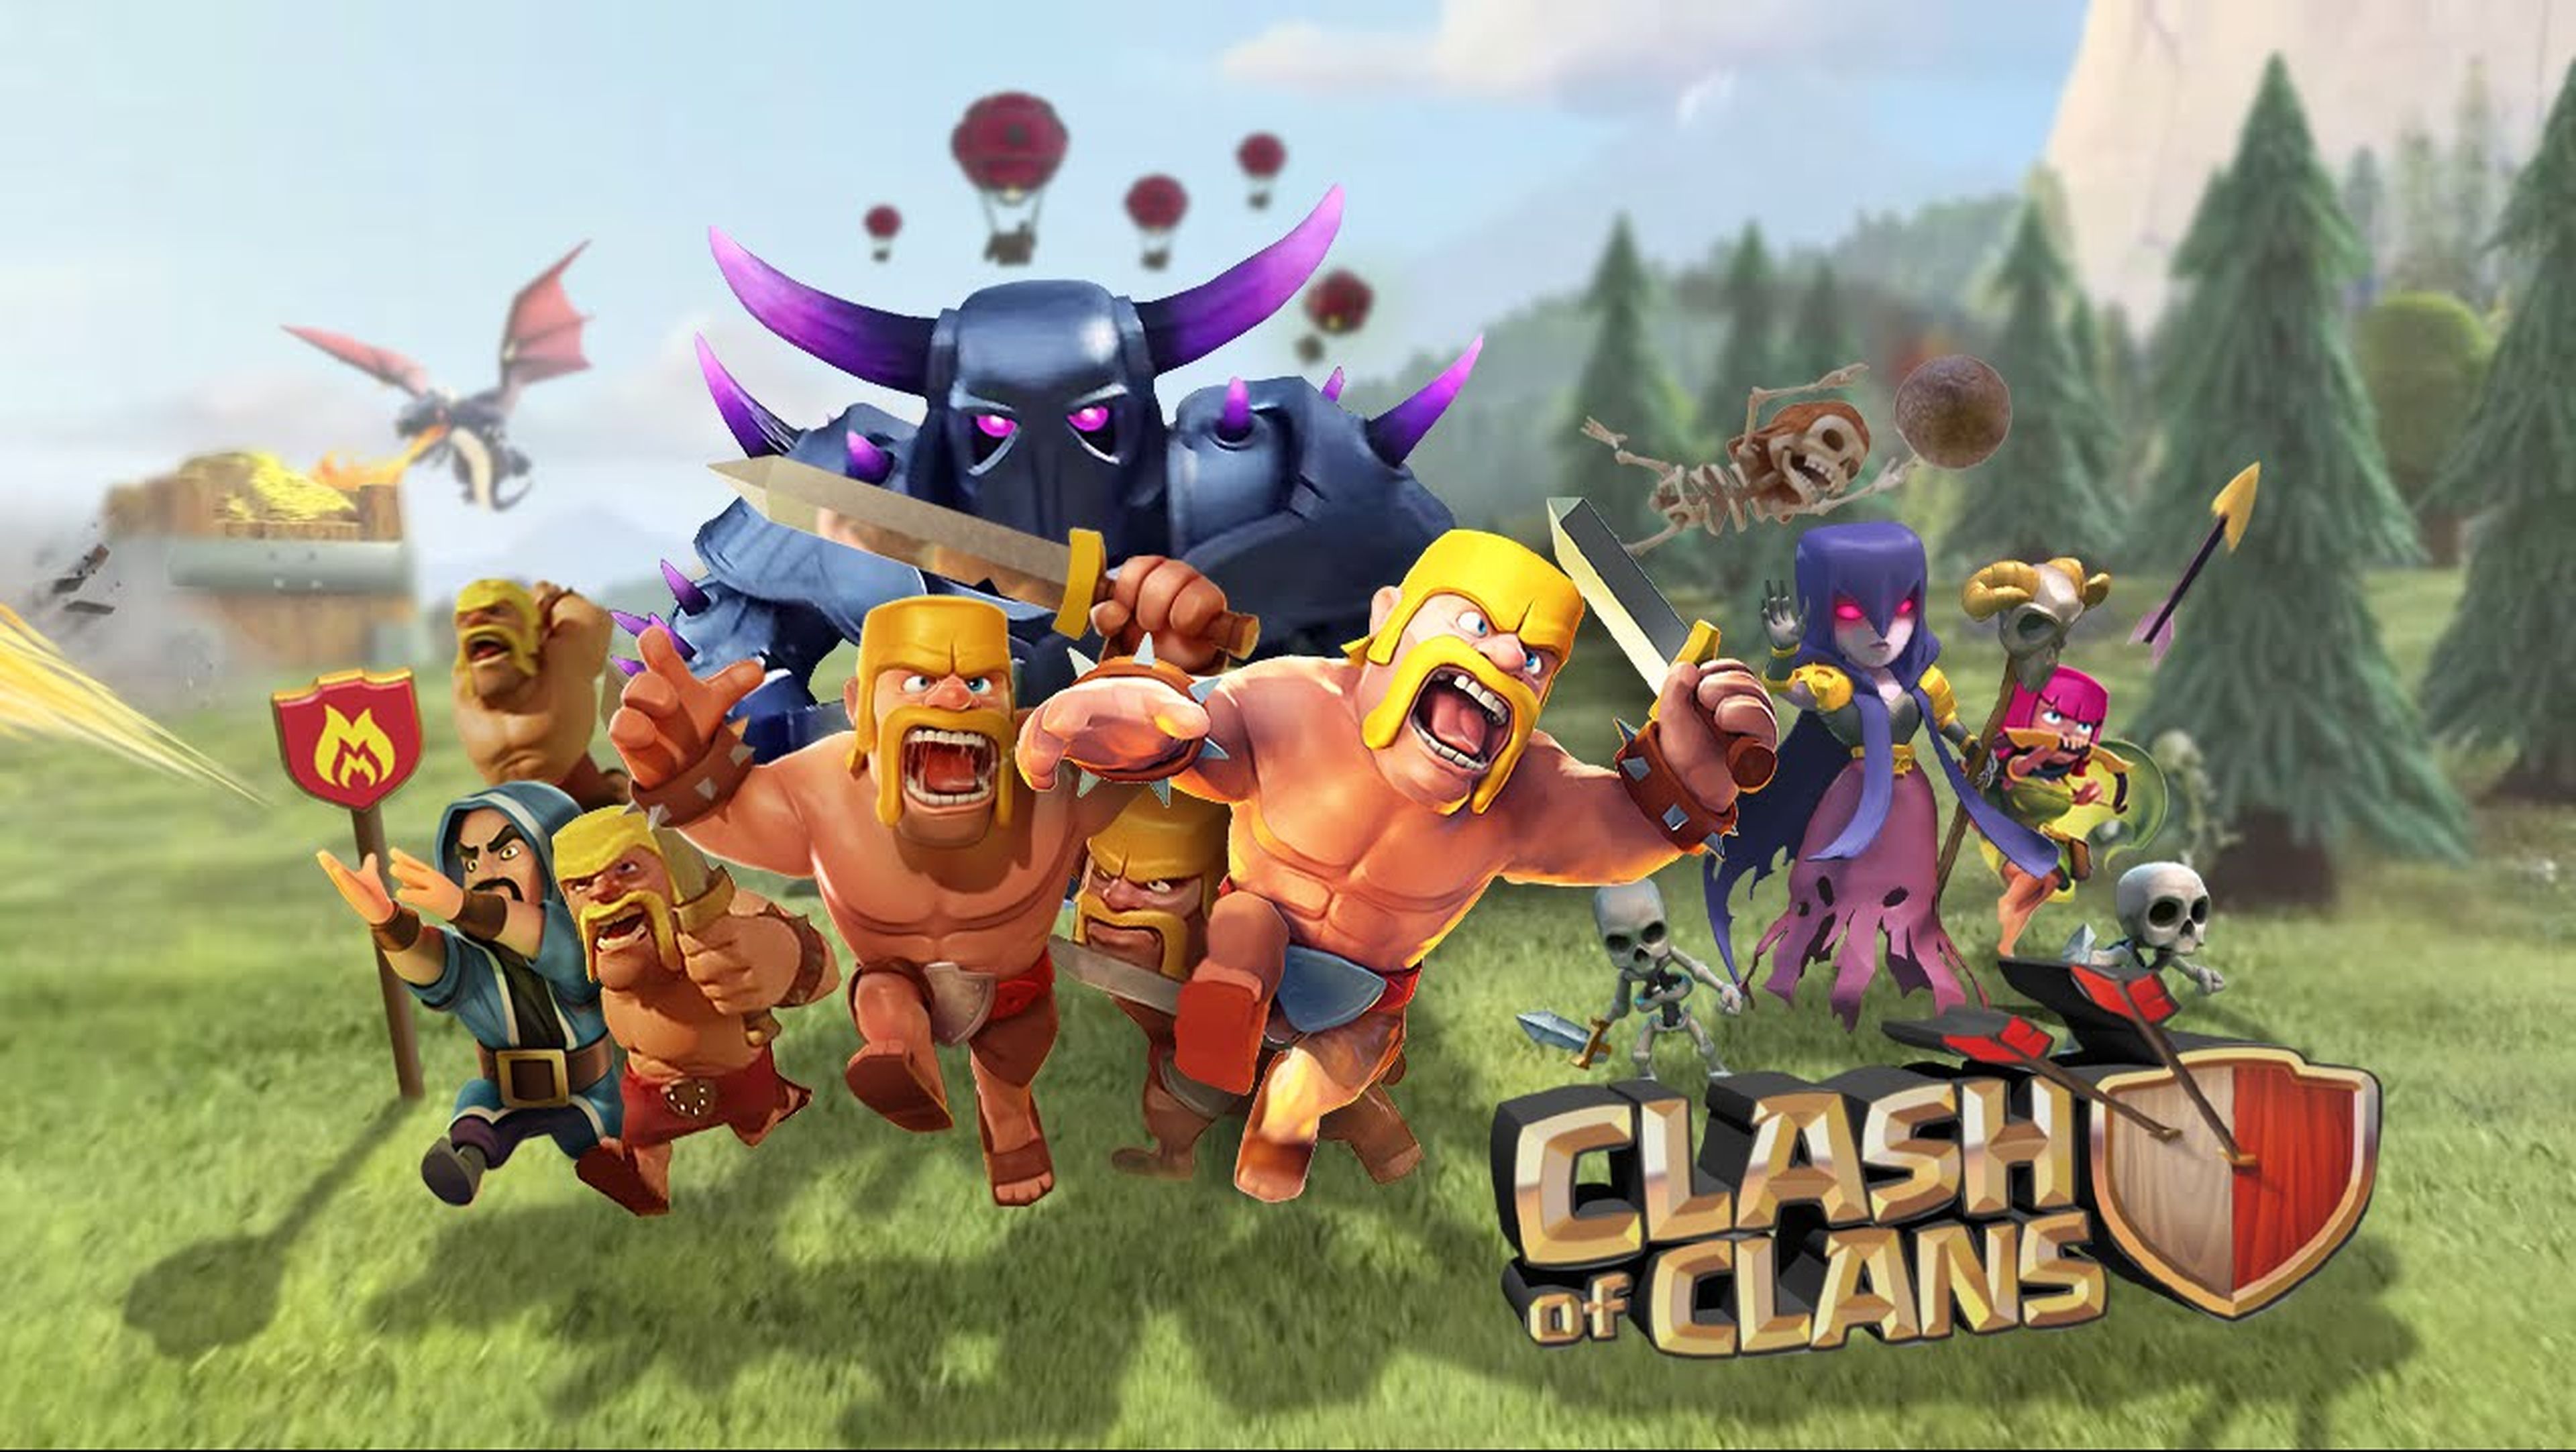 beso besoo recommends Photos Of Clash Of Clans